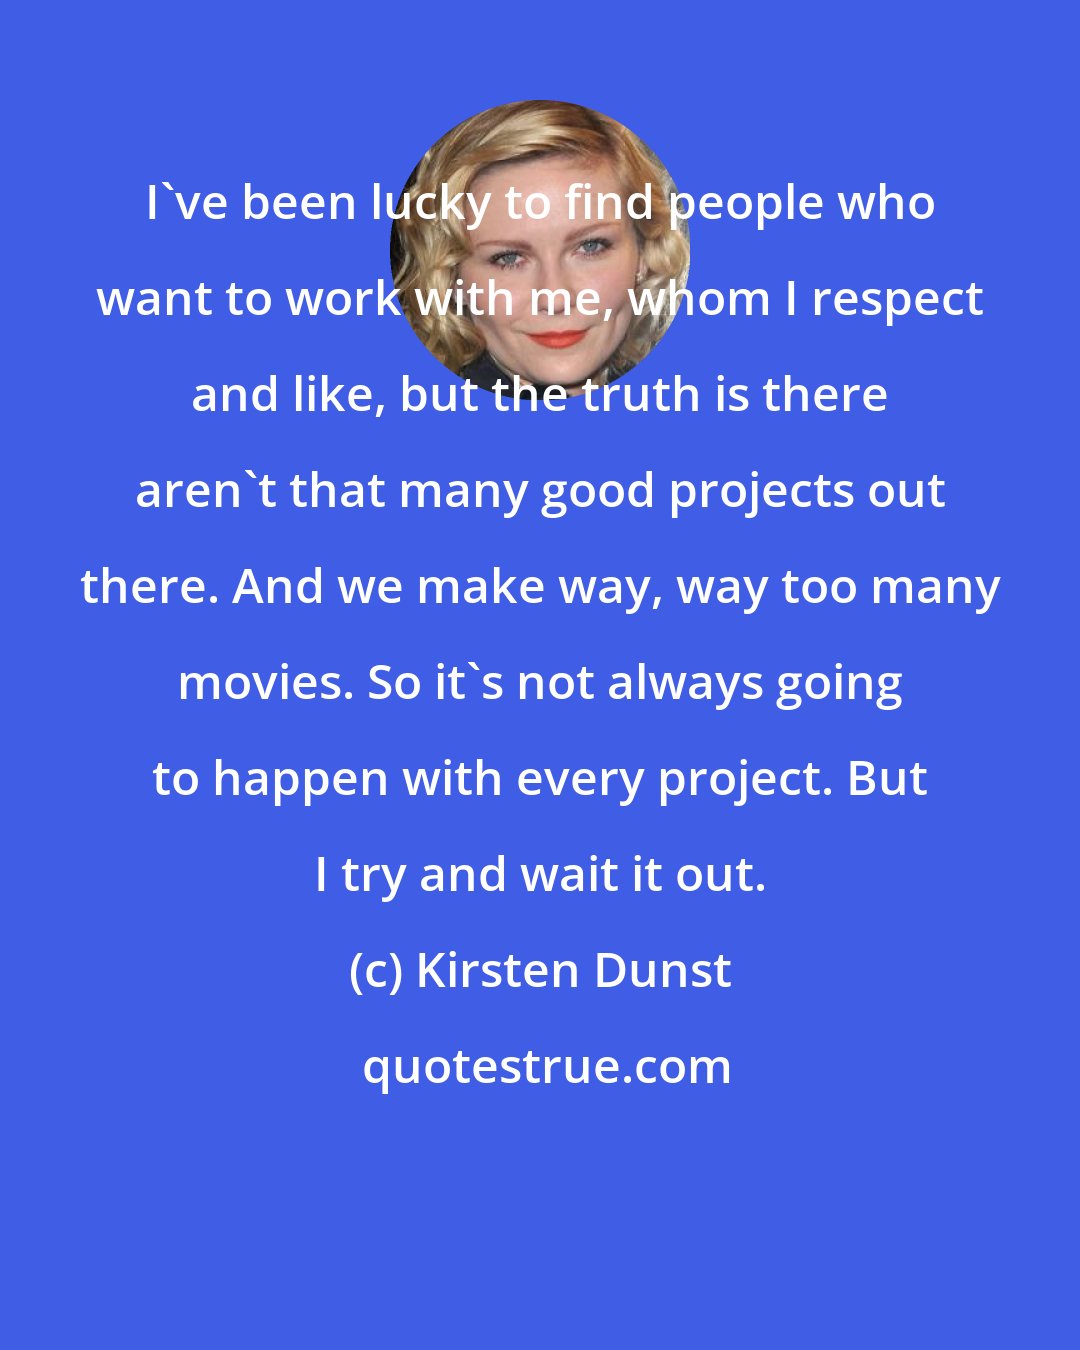 Kirsten Dunst: I've been lucky to find people who want to work with me, whom I respect and like, but the truth is there aren't that many good projects out there. And we make way, way too many movies. So it's not always going to happen with every project. But I try and wait it out.